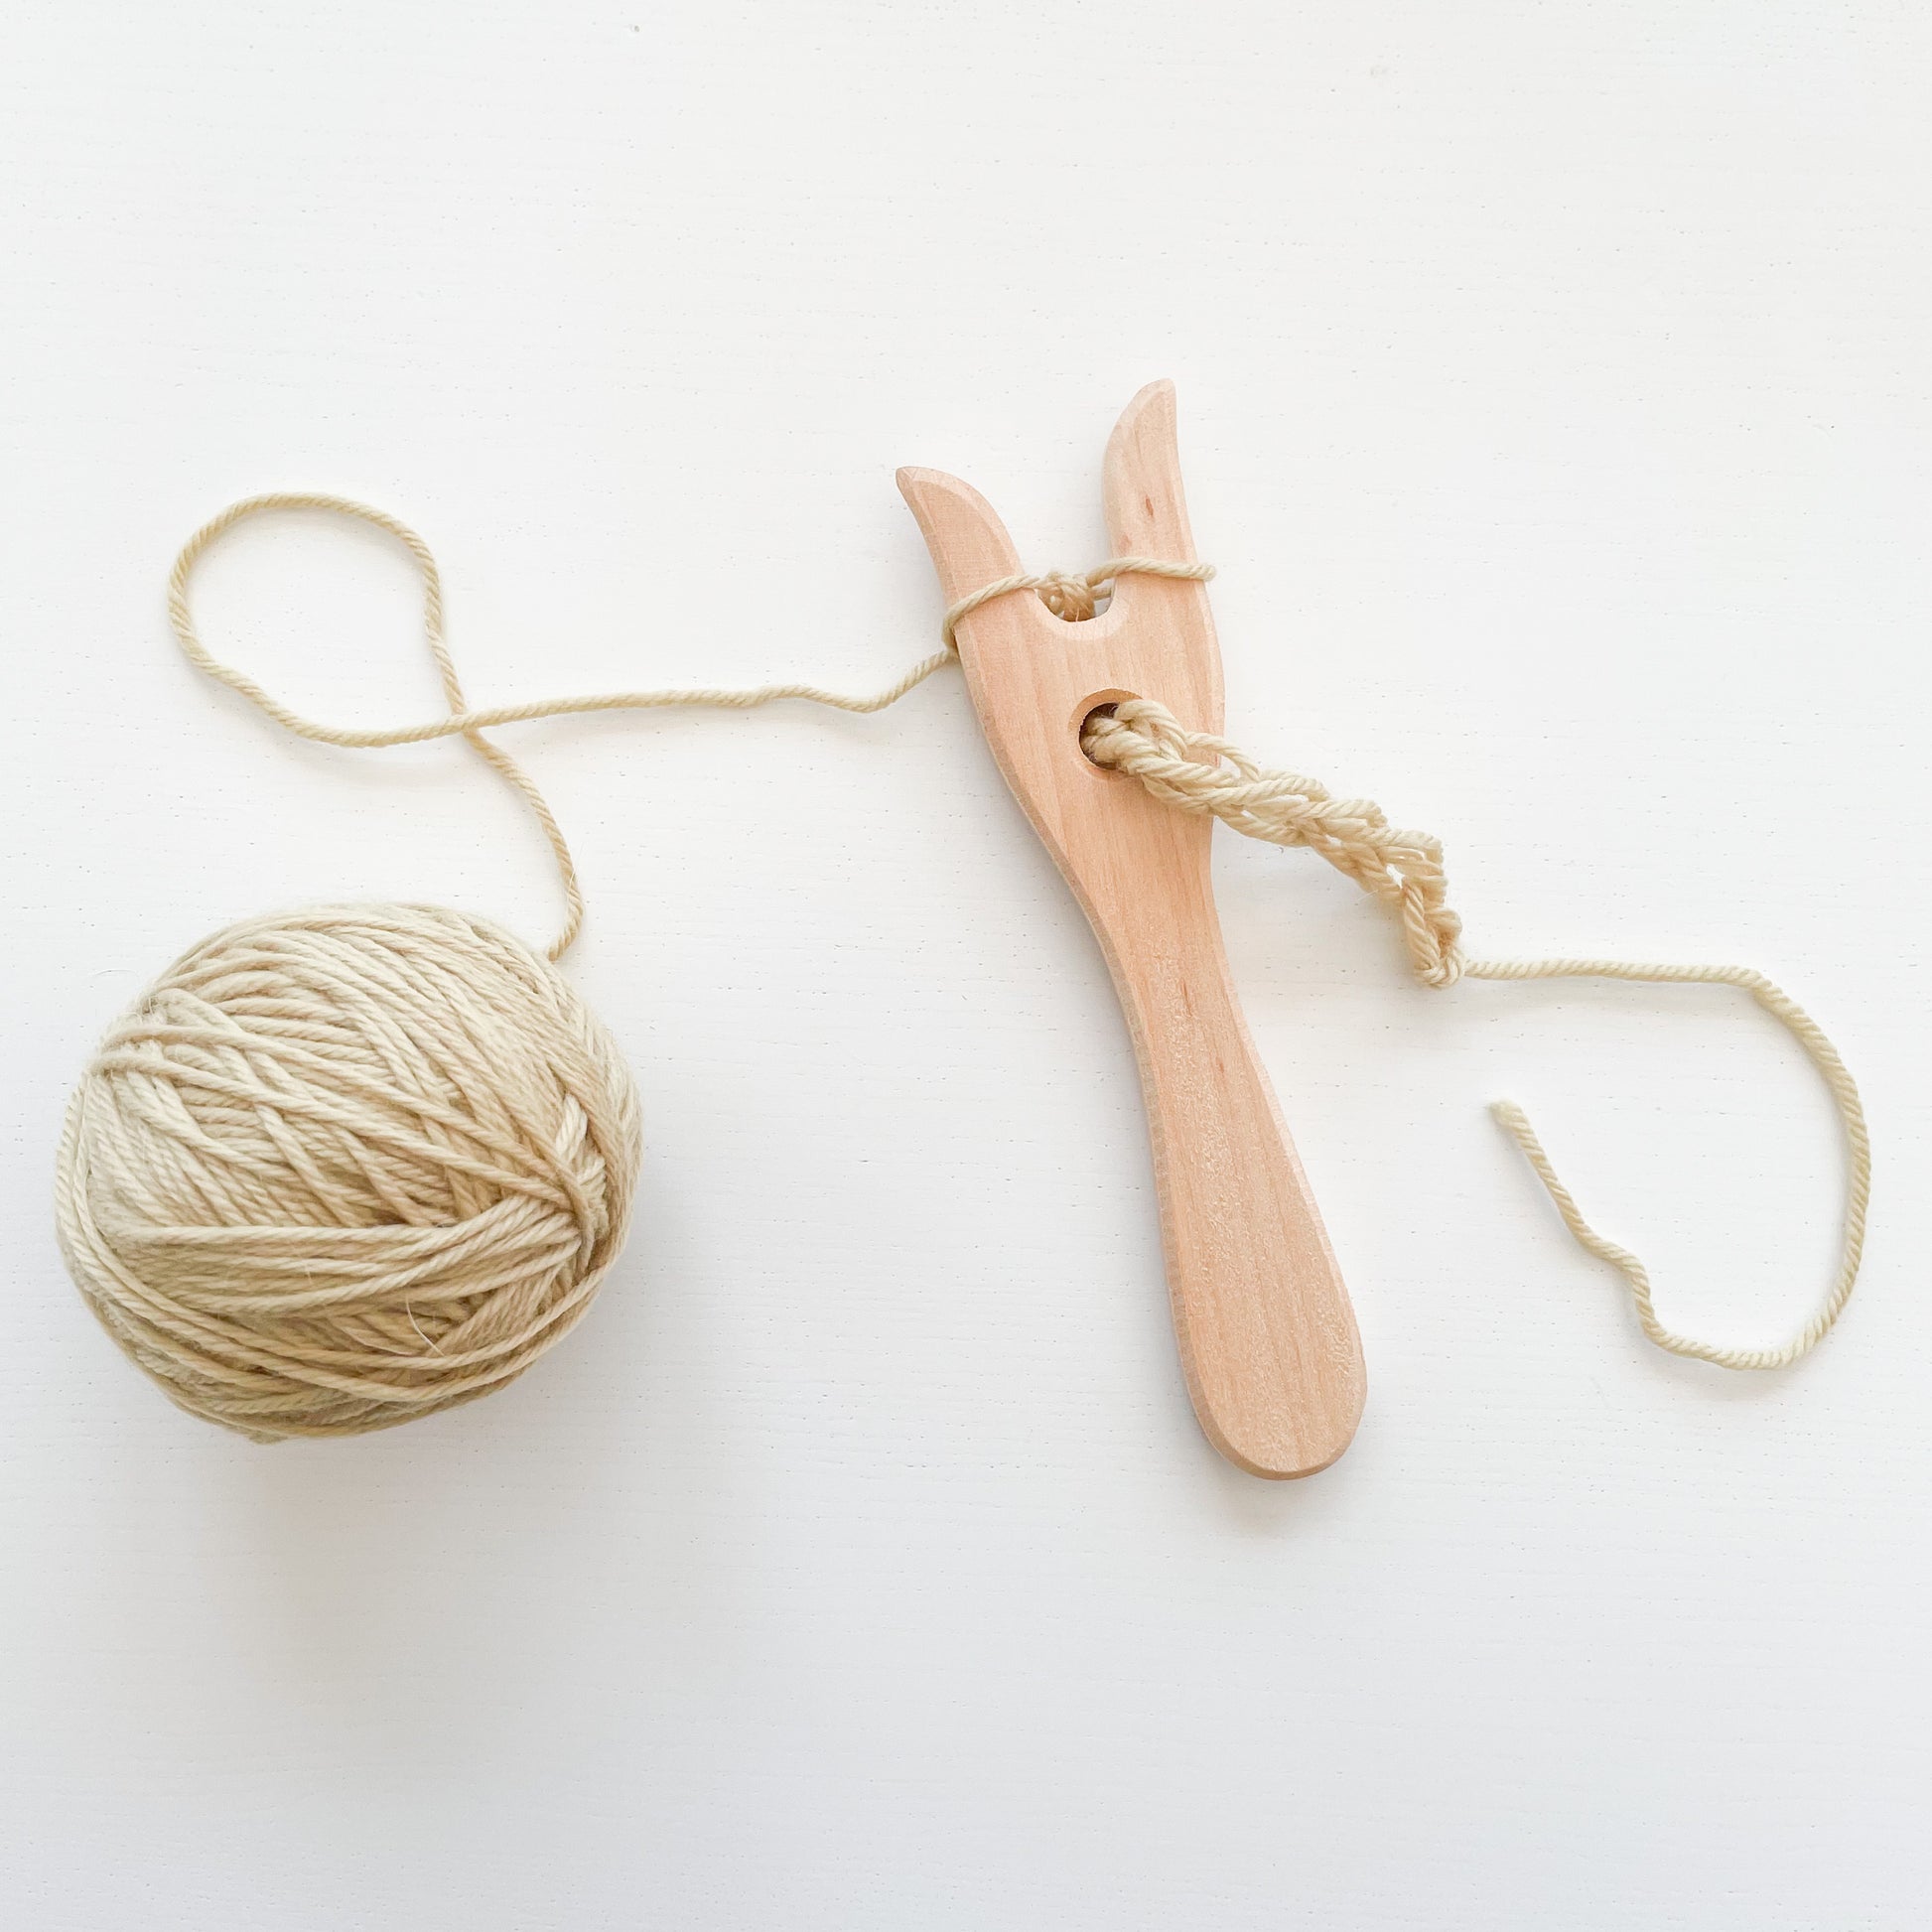 Introduction to the world of knitting - Lucet knitting fork